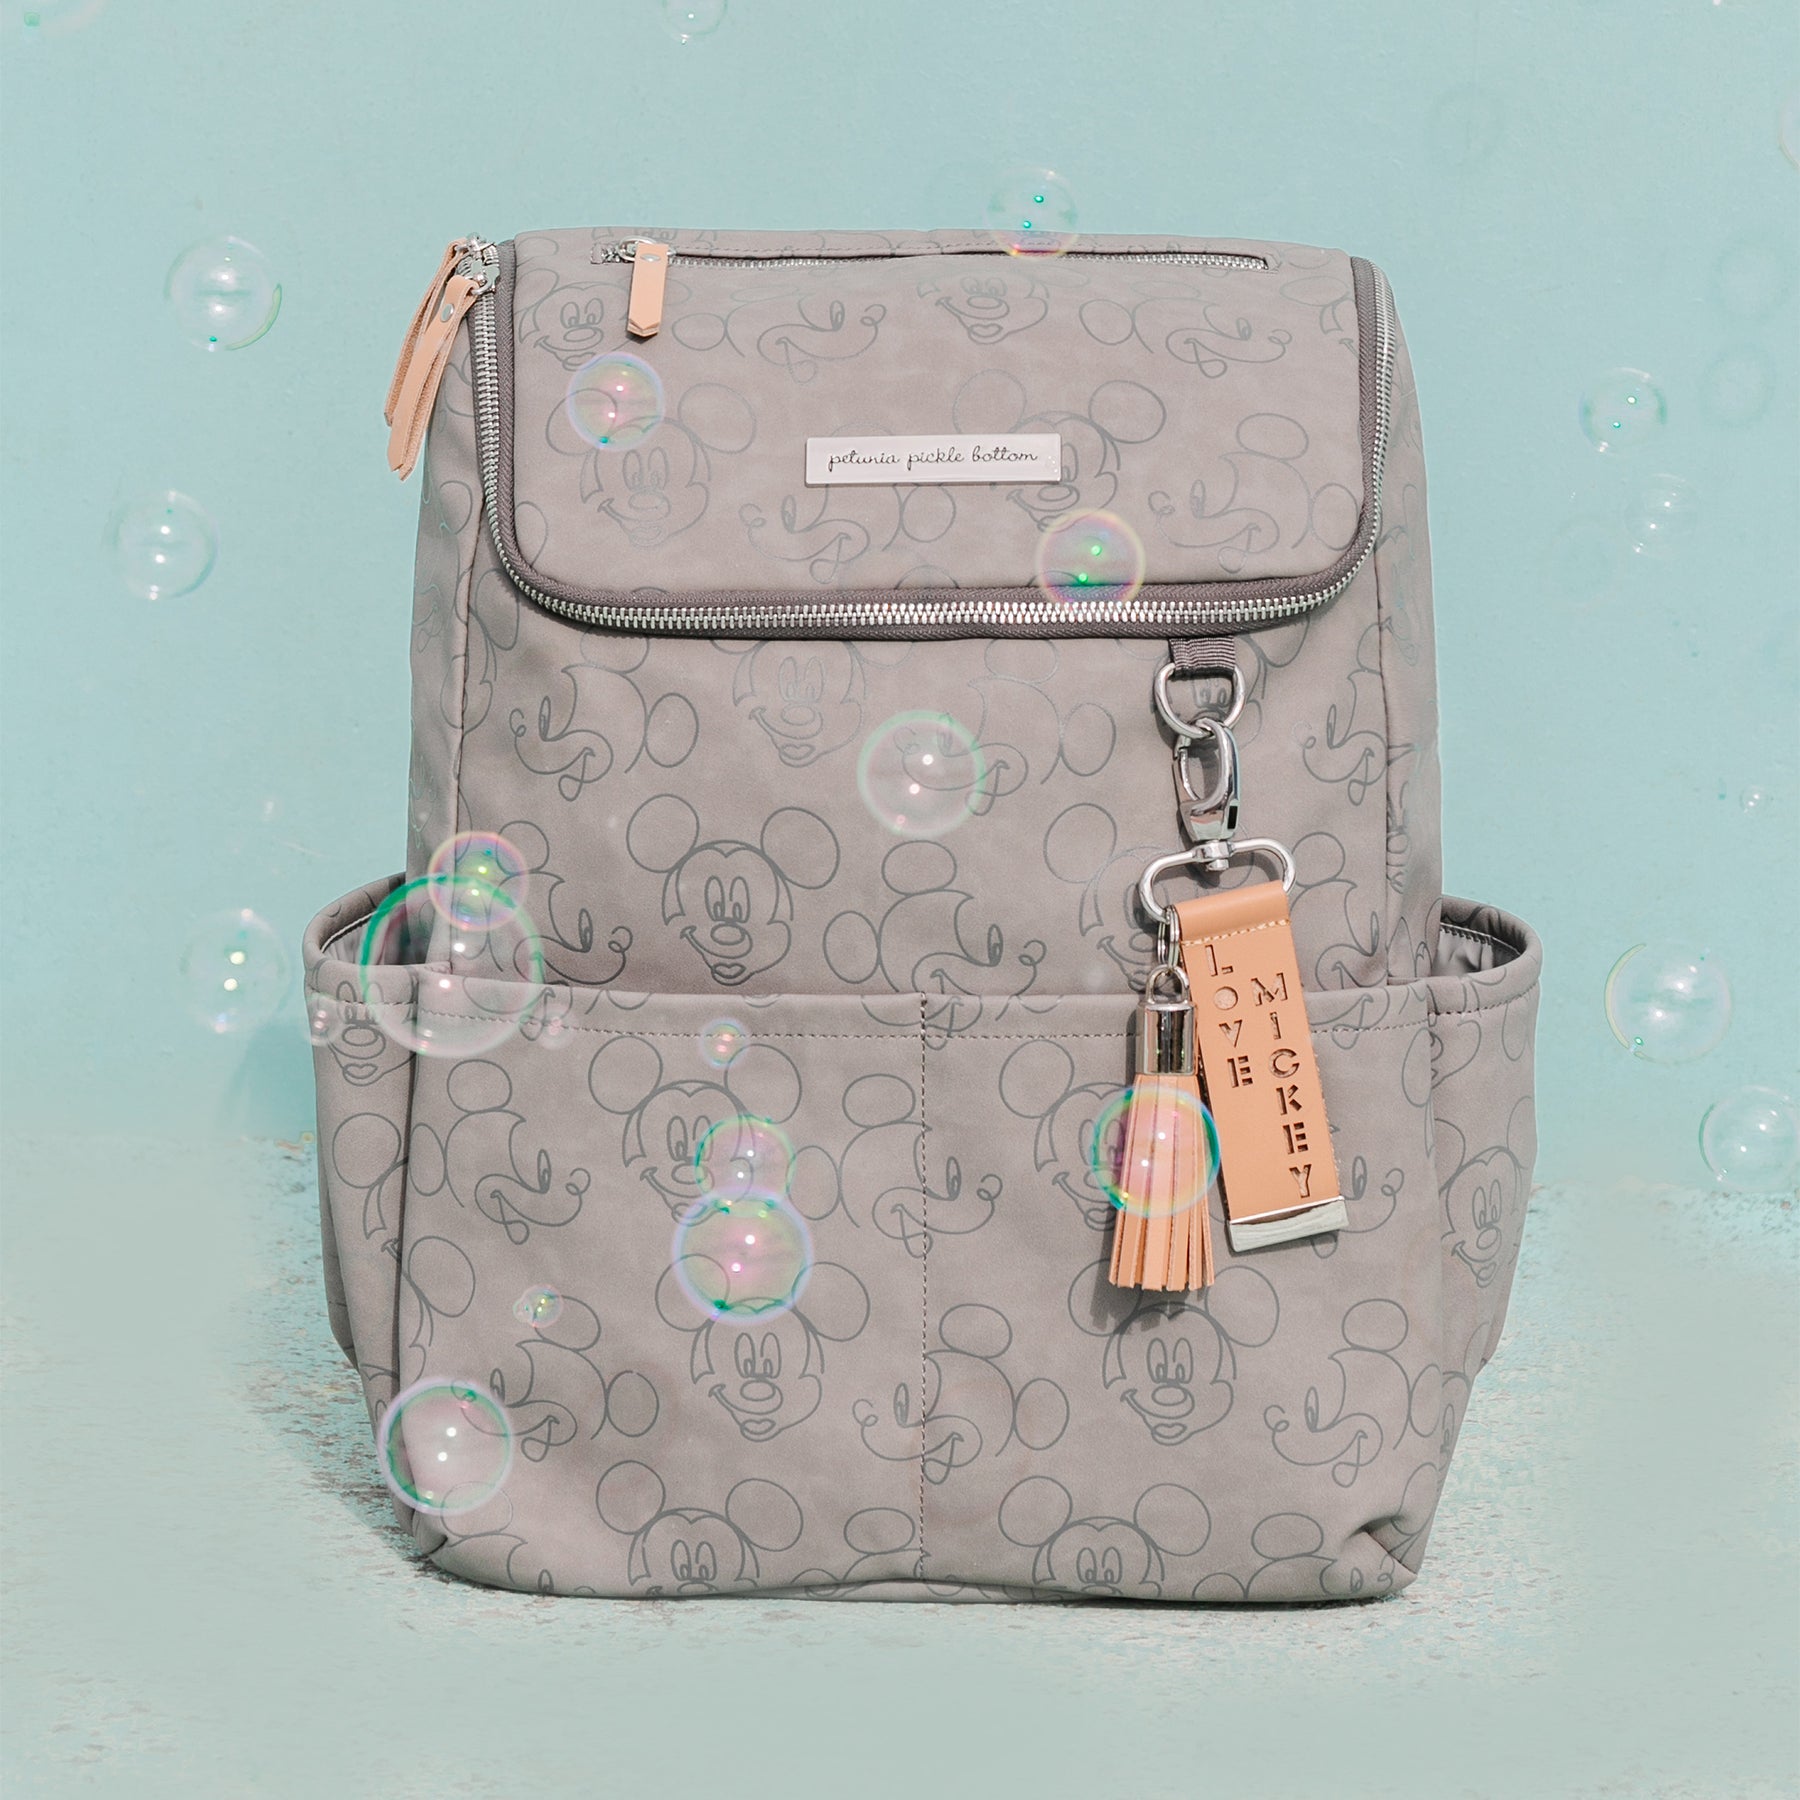 Petunia Pickle Bottom Ace Backpack Diaper Bag in Shimmery Minnie Mouse